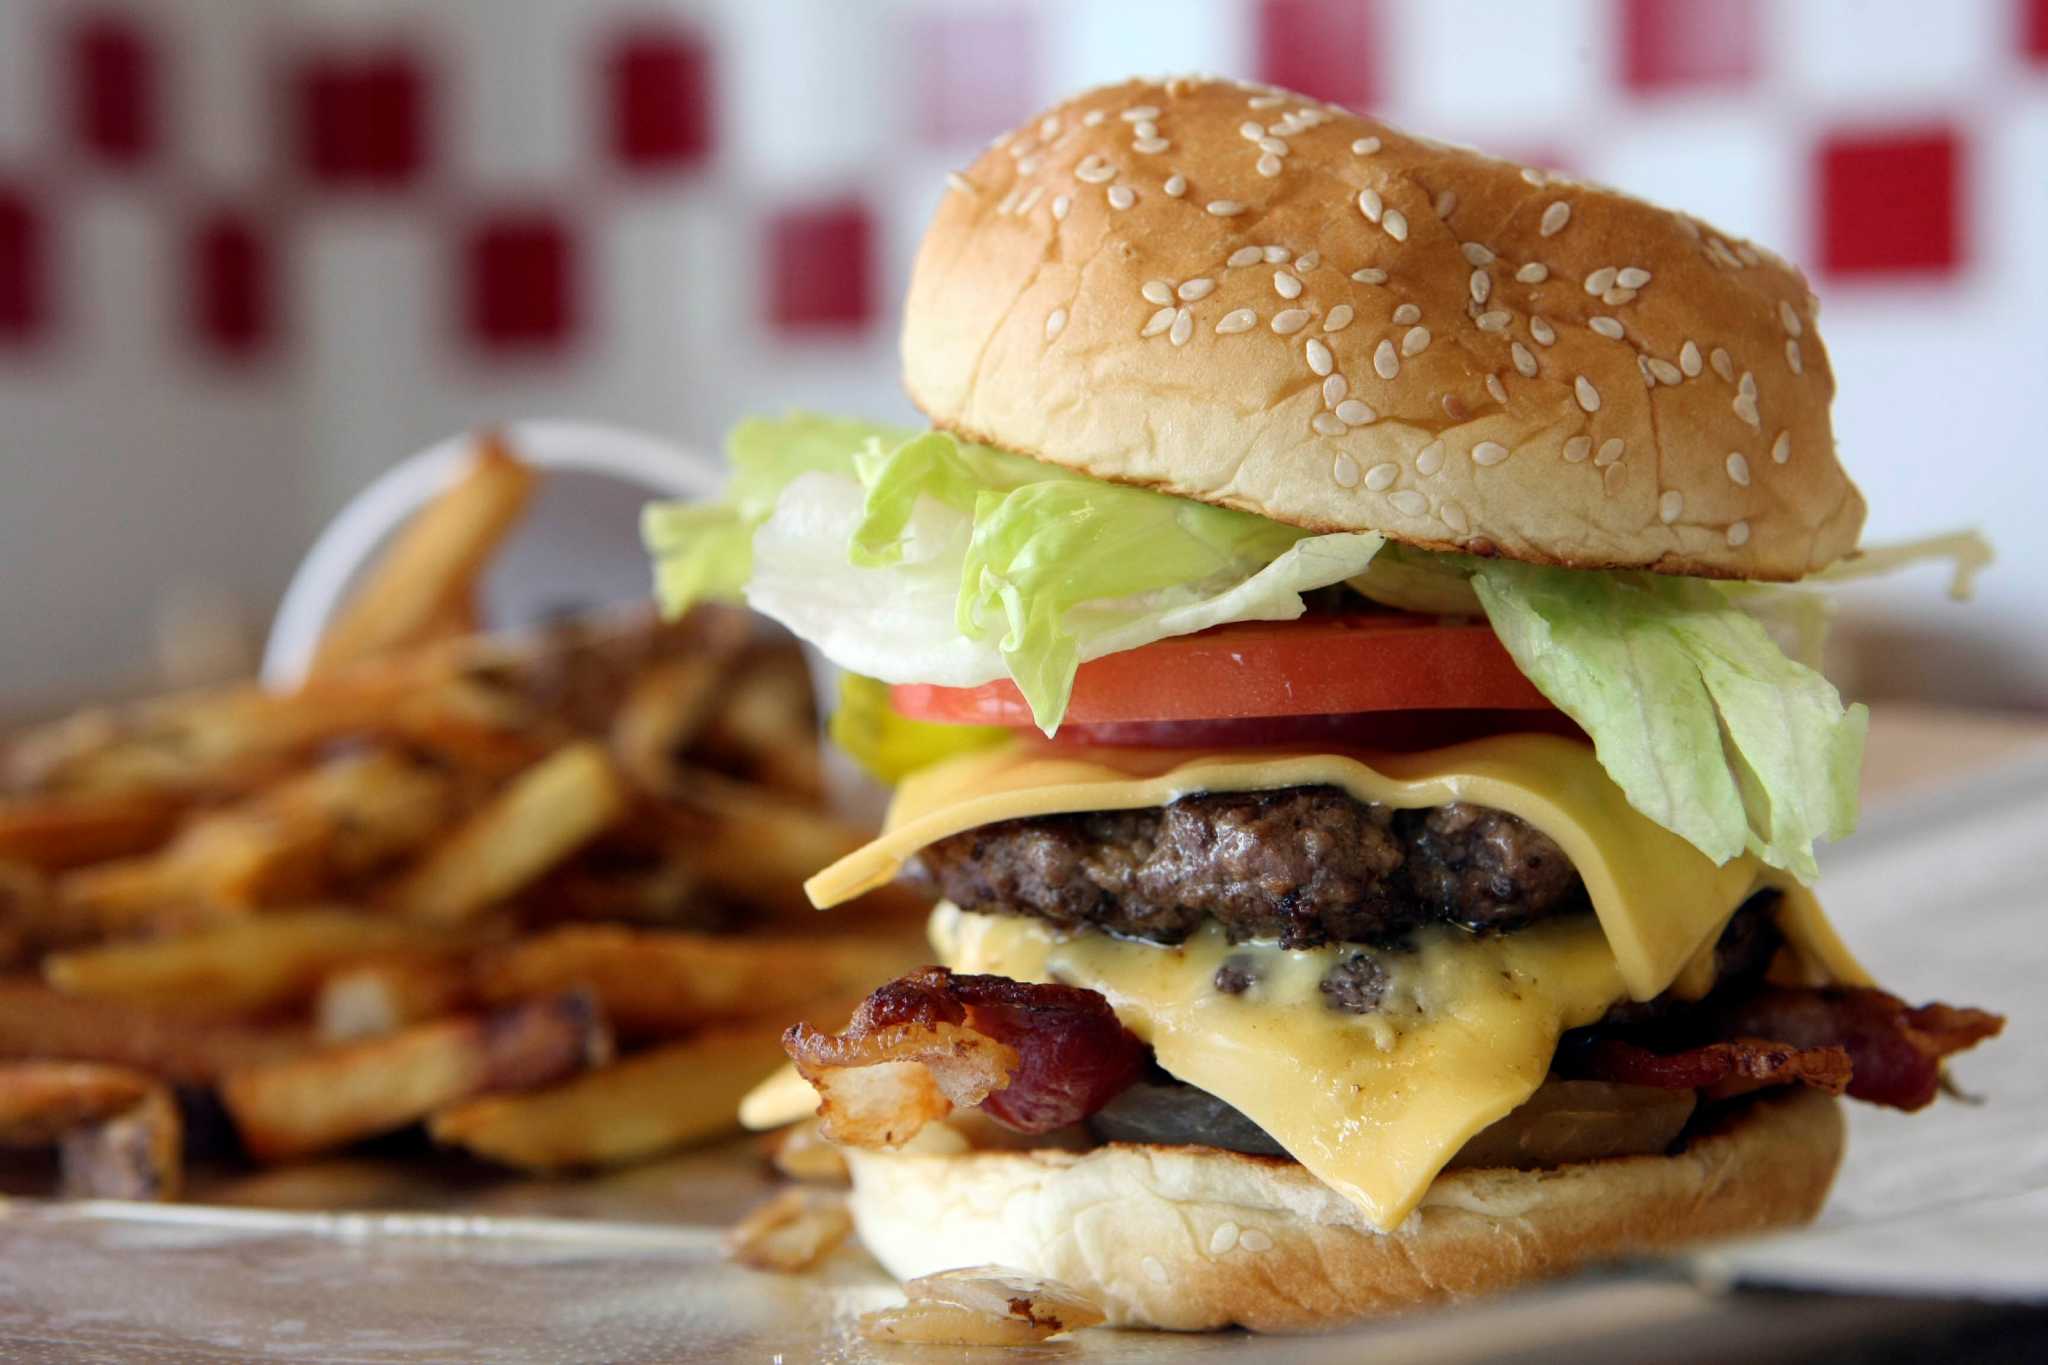 These fast-food items have even more calories than you thought